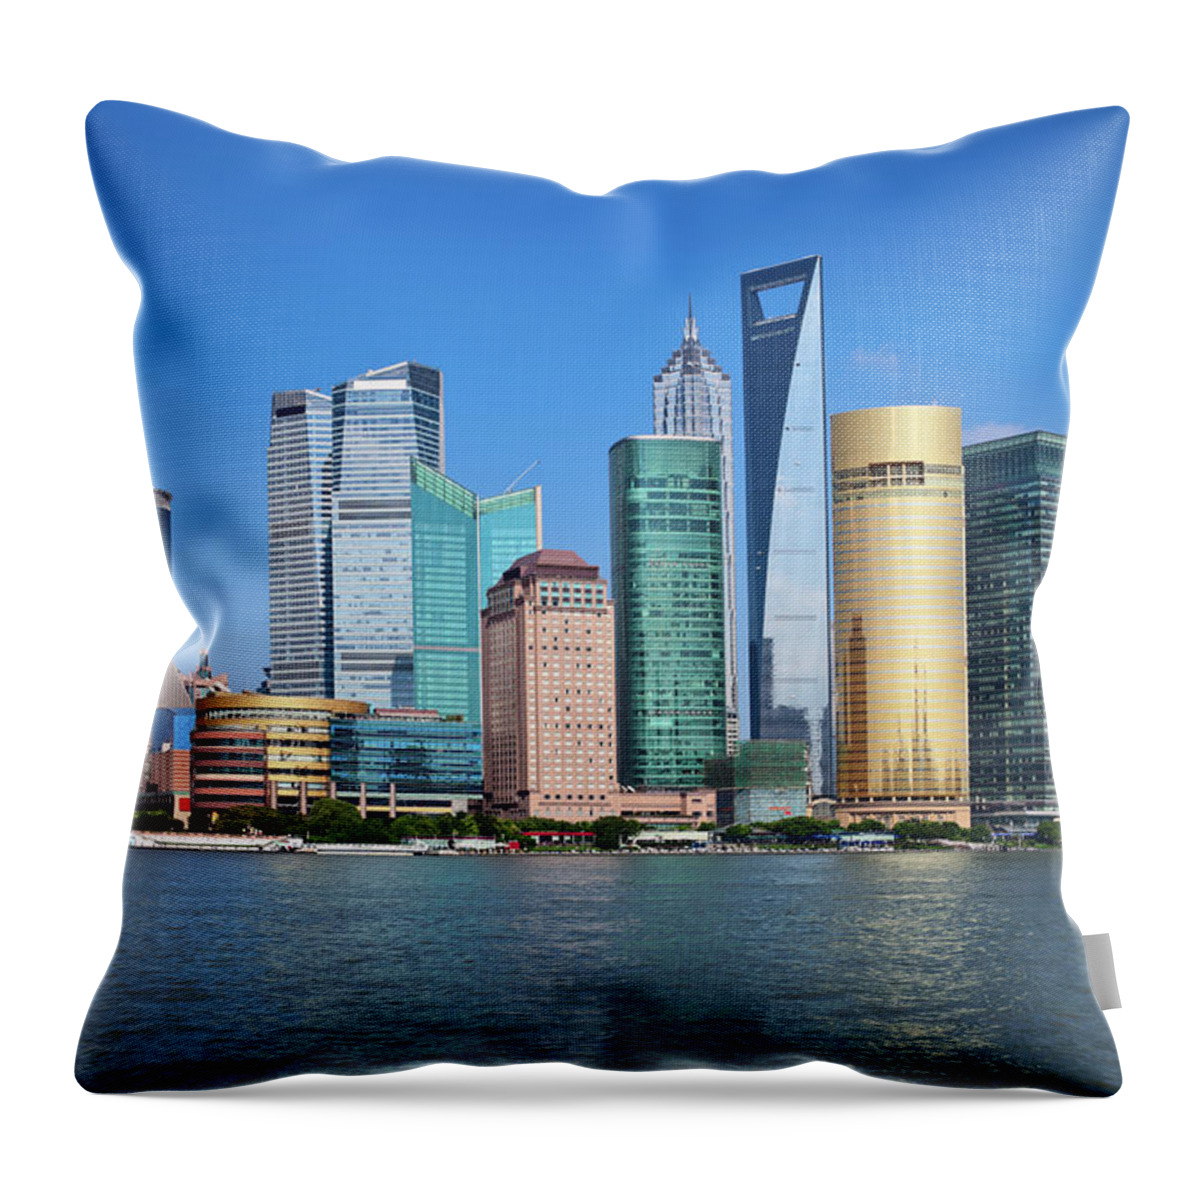 Chinese Culture Throw Pillow featuring the photograph Shanghai Pudong Cityscape by Ithinksky